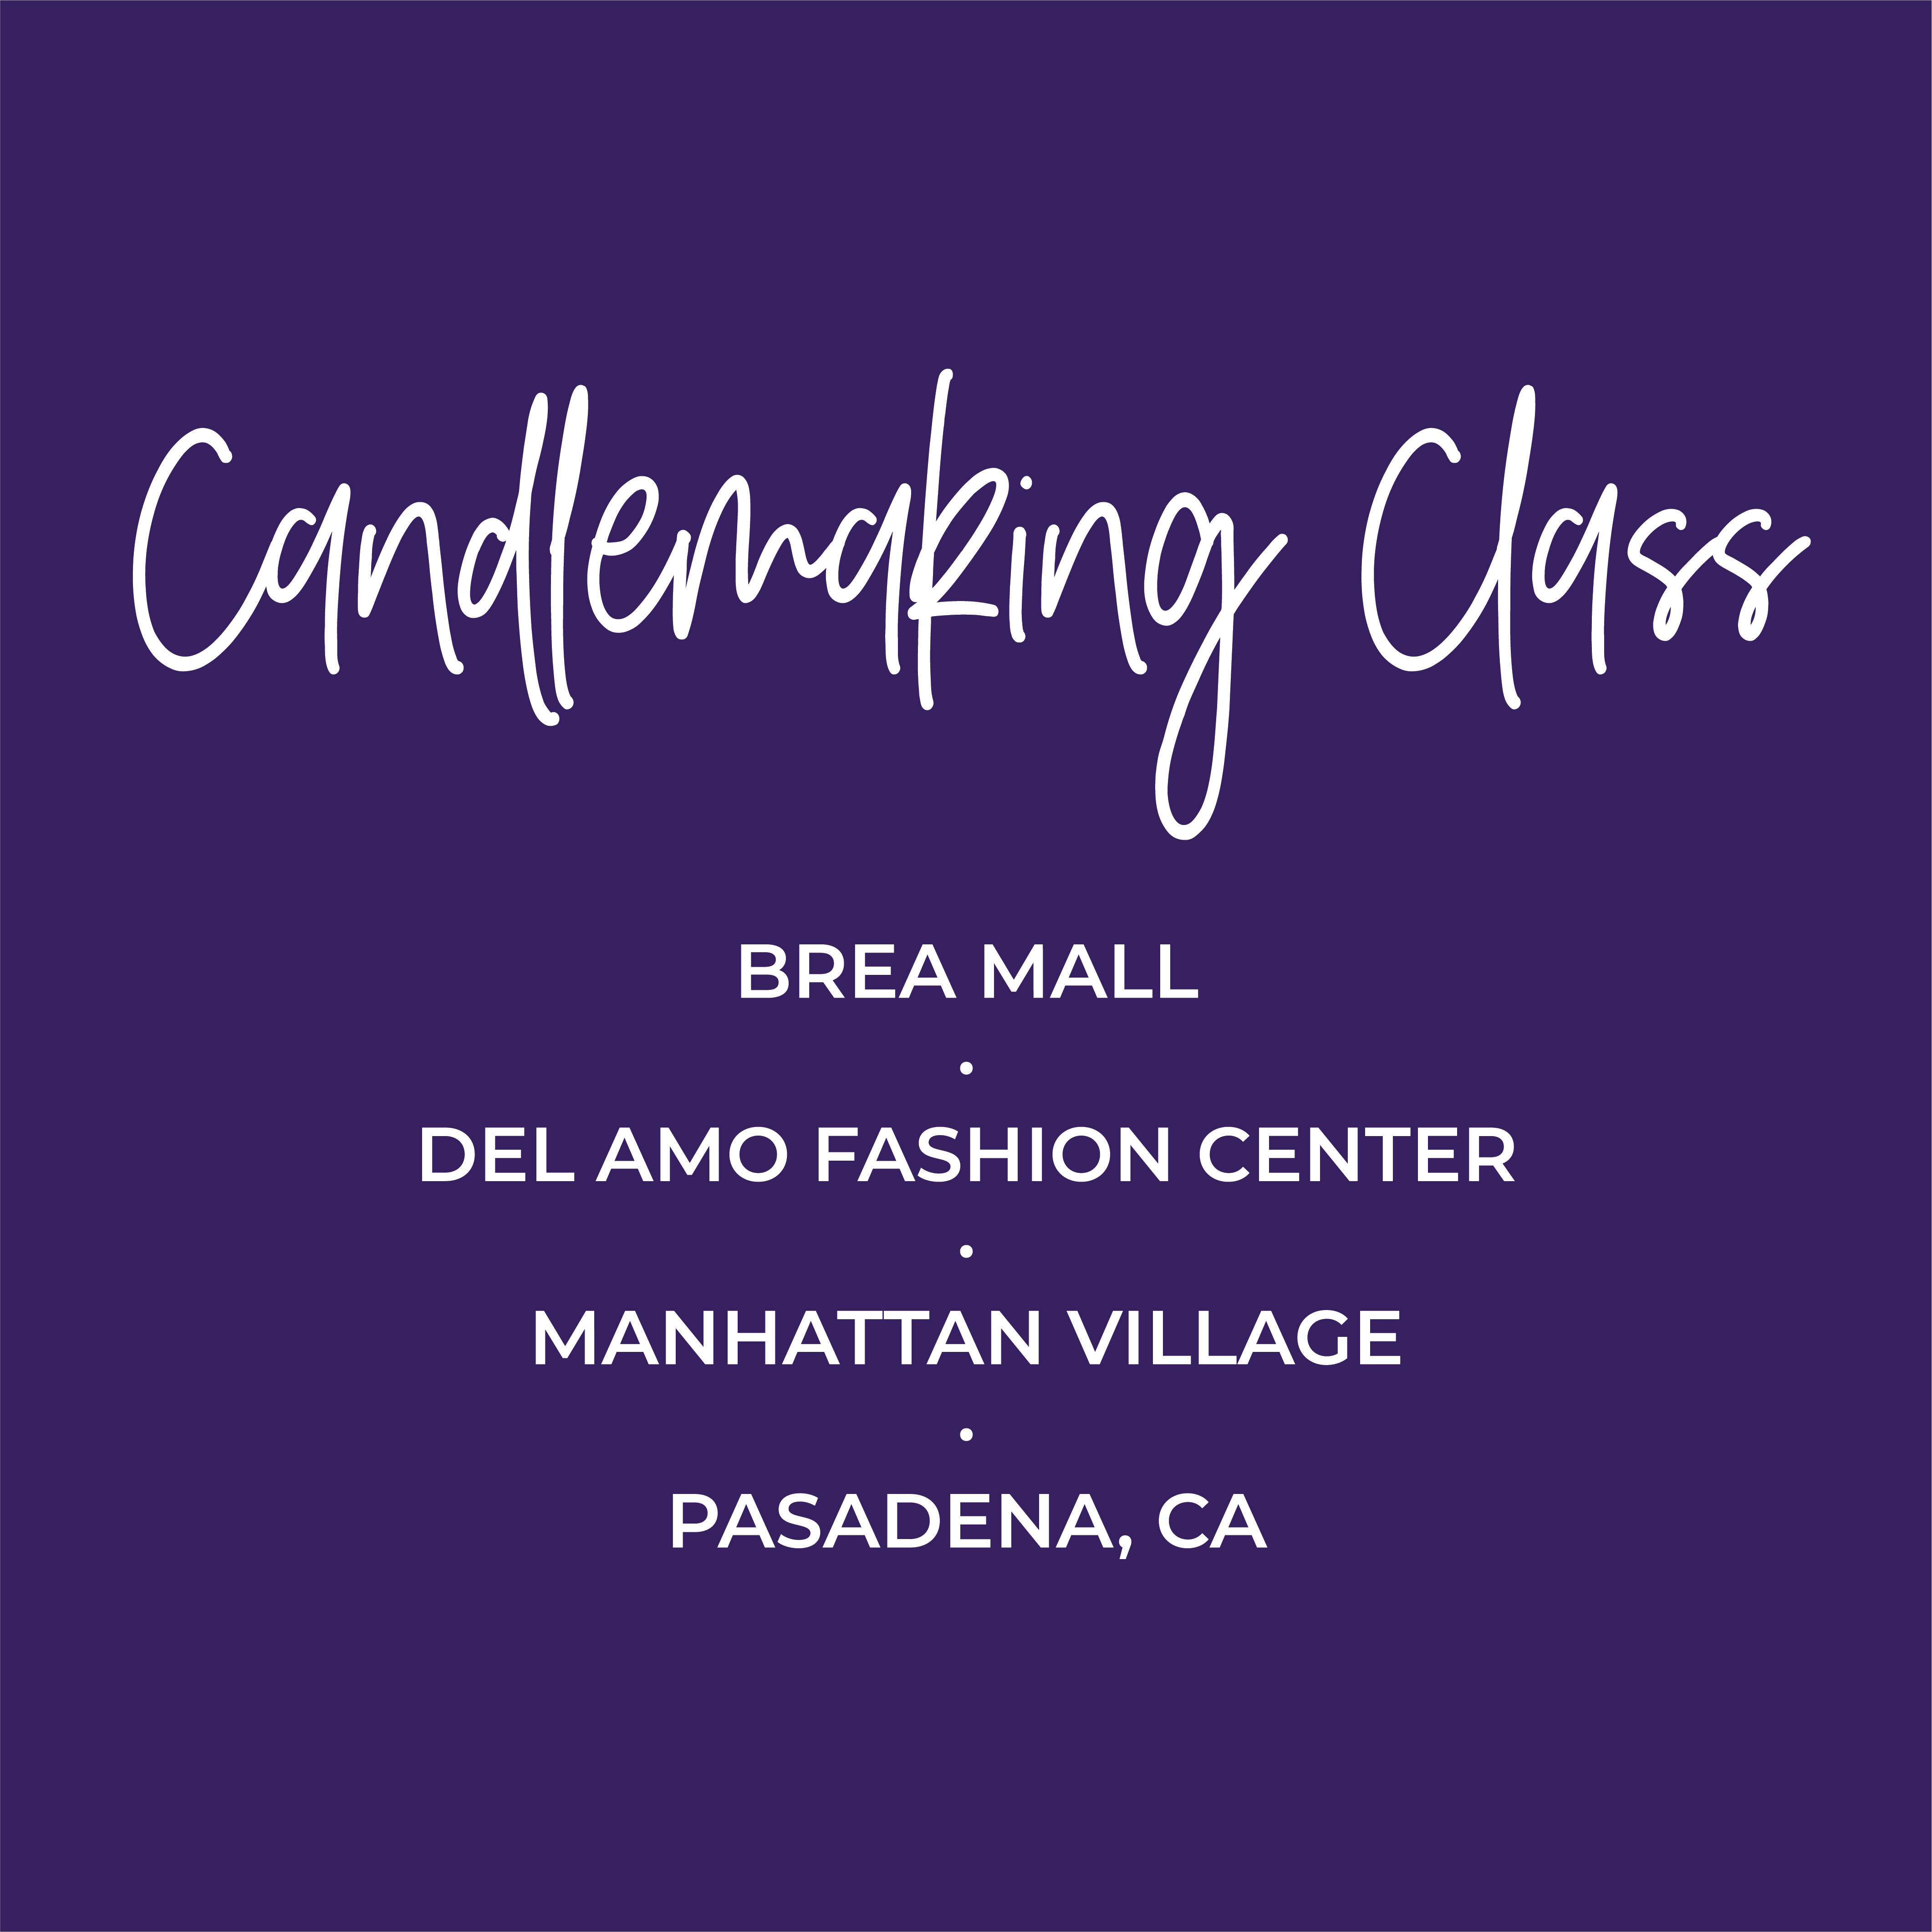 Candlemaking Class Location List